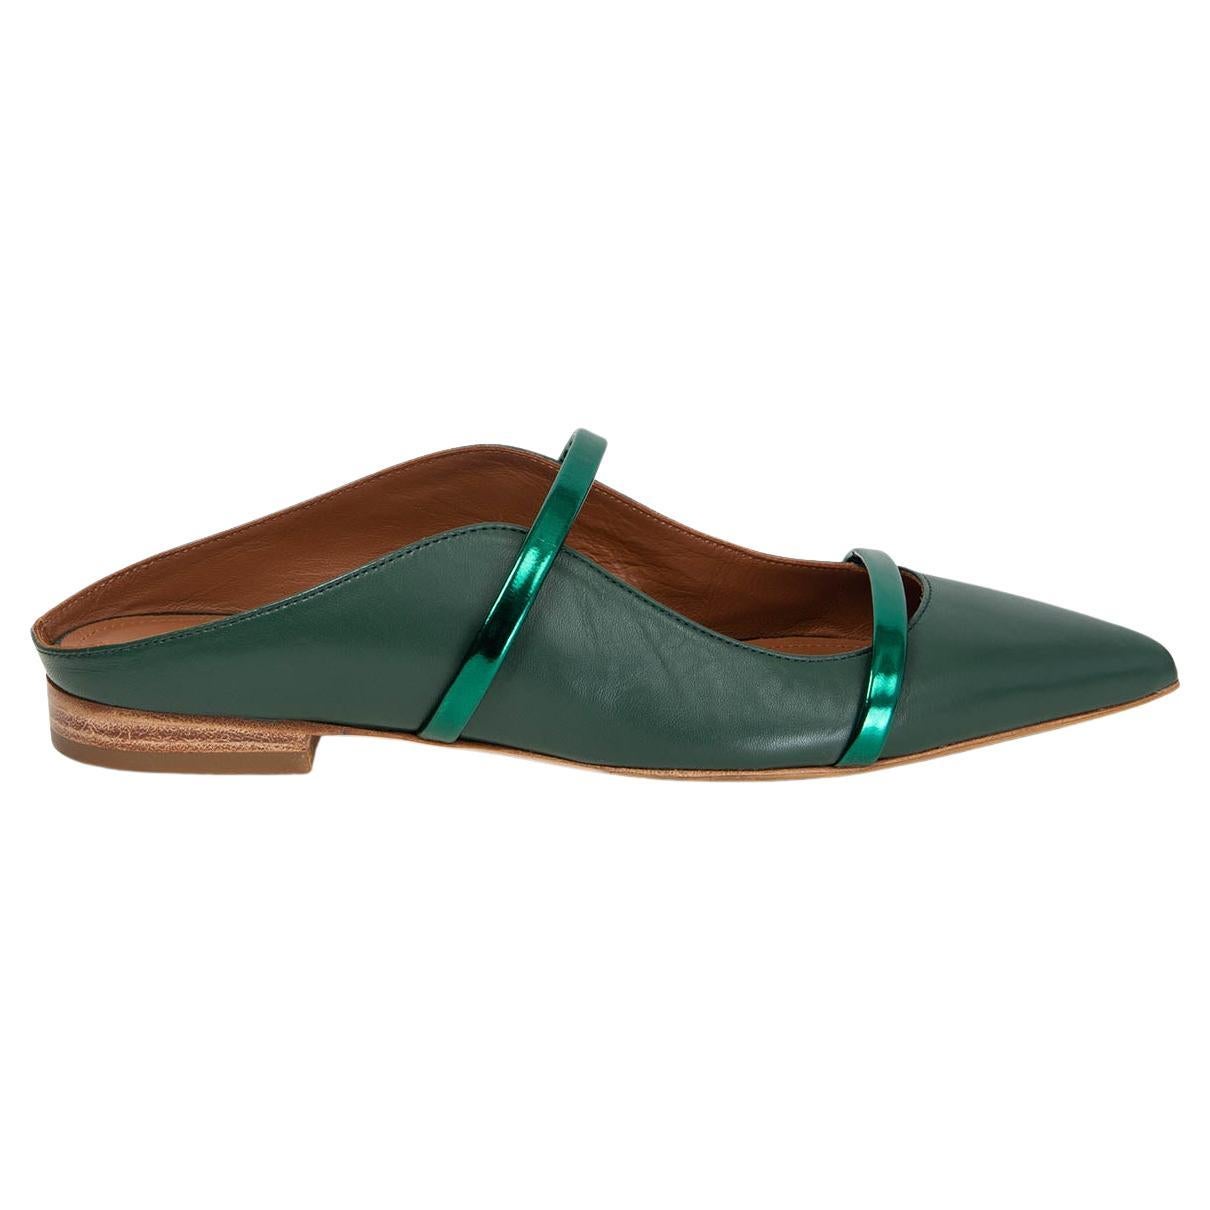 MALONE SOULIERS dark green leather & metallic MAUREEN Ballet Flats Shoes 38 For Sale